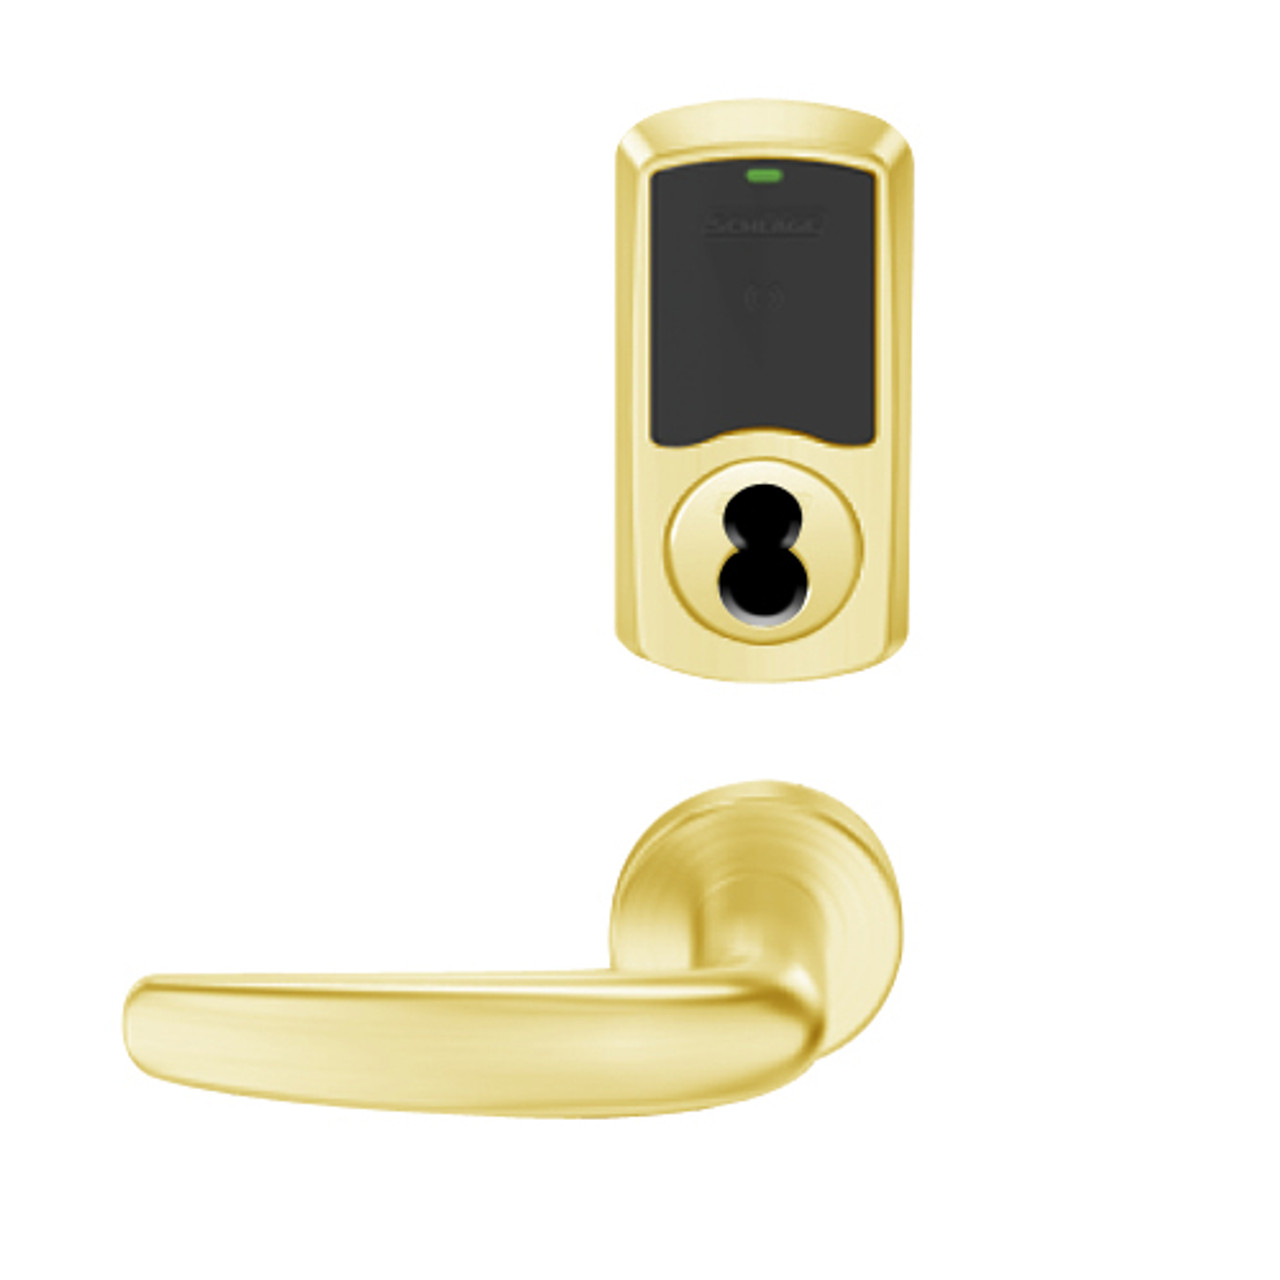 LEMS-GRW-BD-07-605-00B Schlage Storeroom Wireless Greenwich Mortise Lock with LED Indicator and Athens Lever Prepped for SFIC in Bright Brass